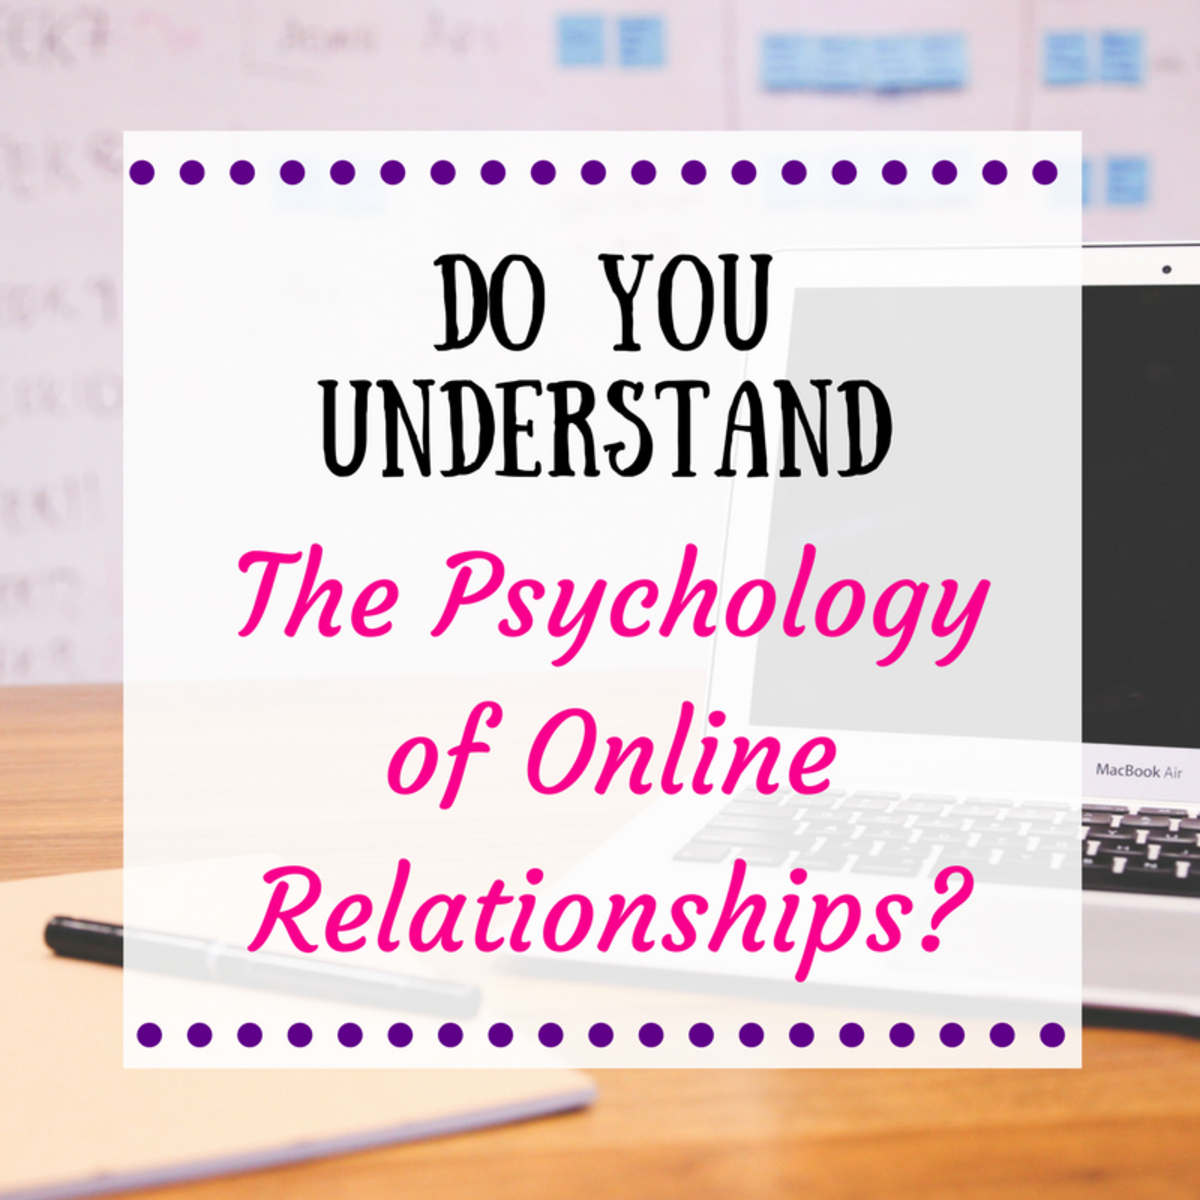 This article will break down the psychology of online relationships.